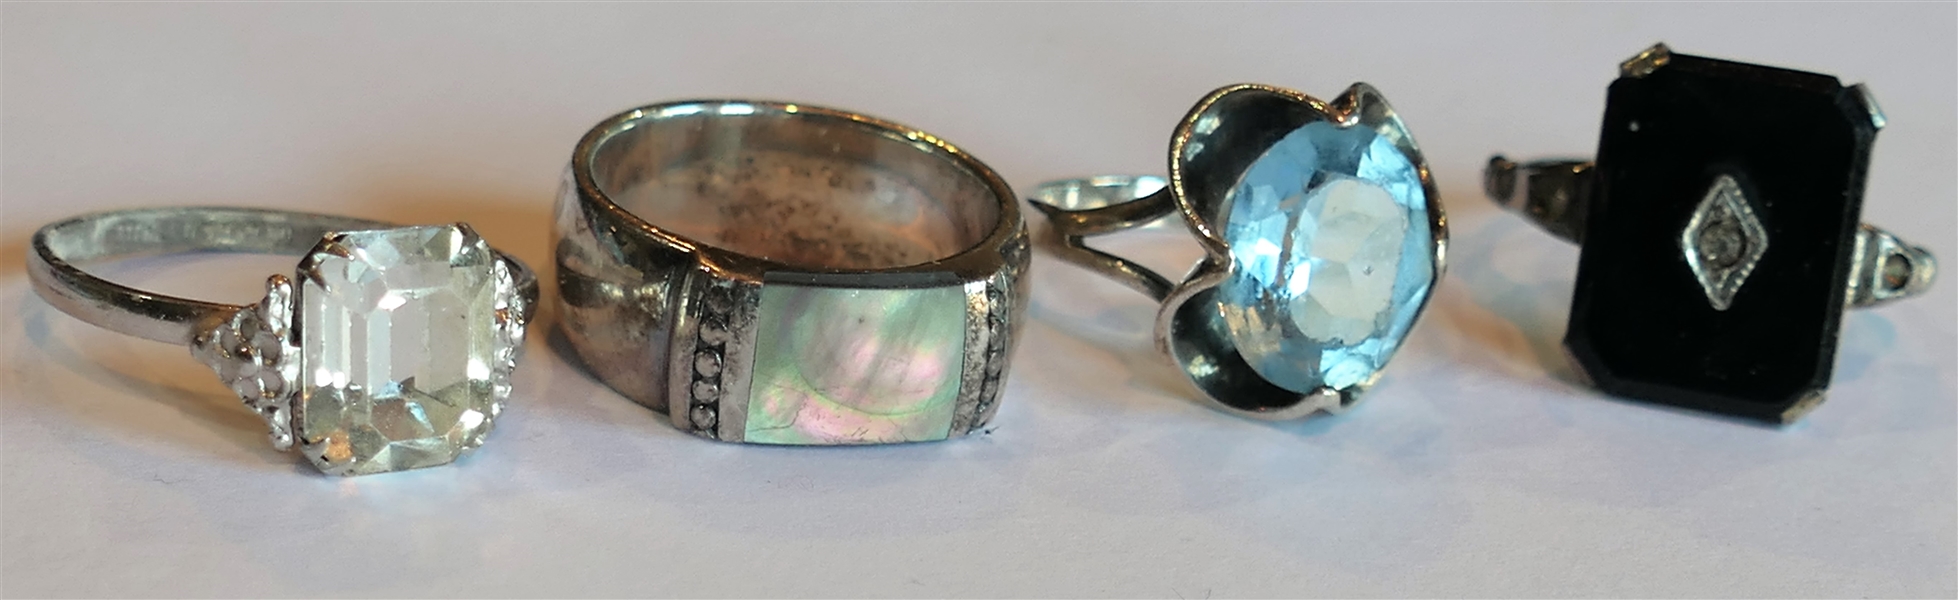 4 Sterling Silver Rings - Mother of Pearl Band Size 7, Blue Faceted Stone Size 7, Clear Stone Size 8, and Black Stone Adjustable Size 